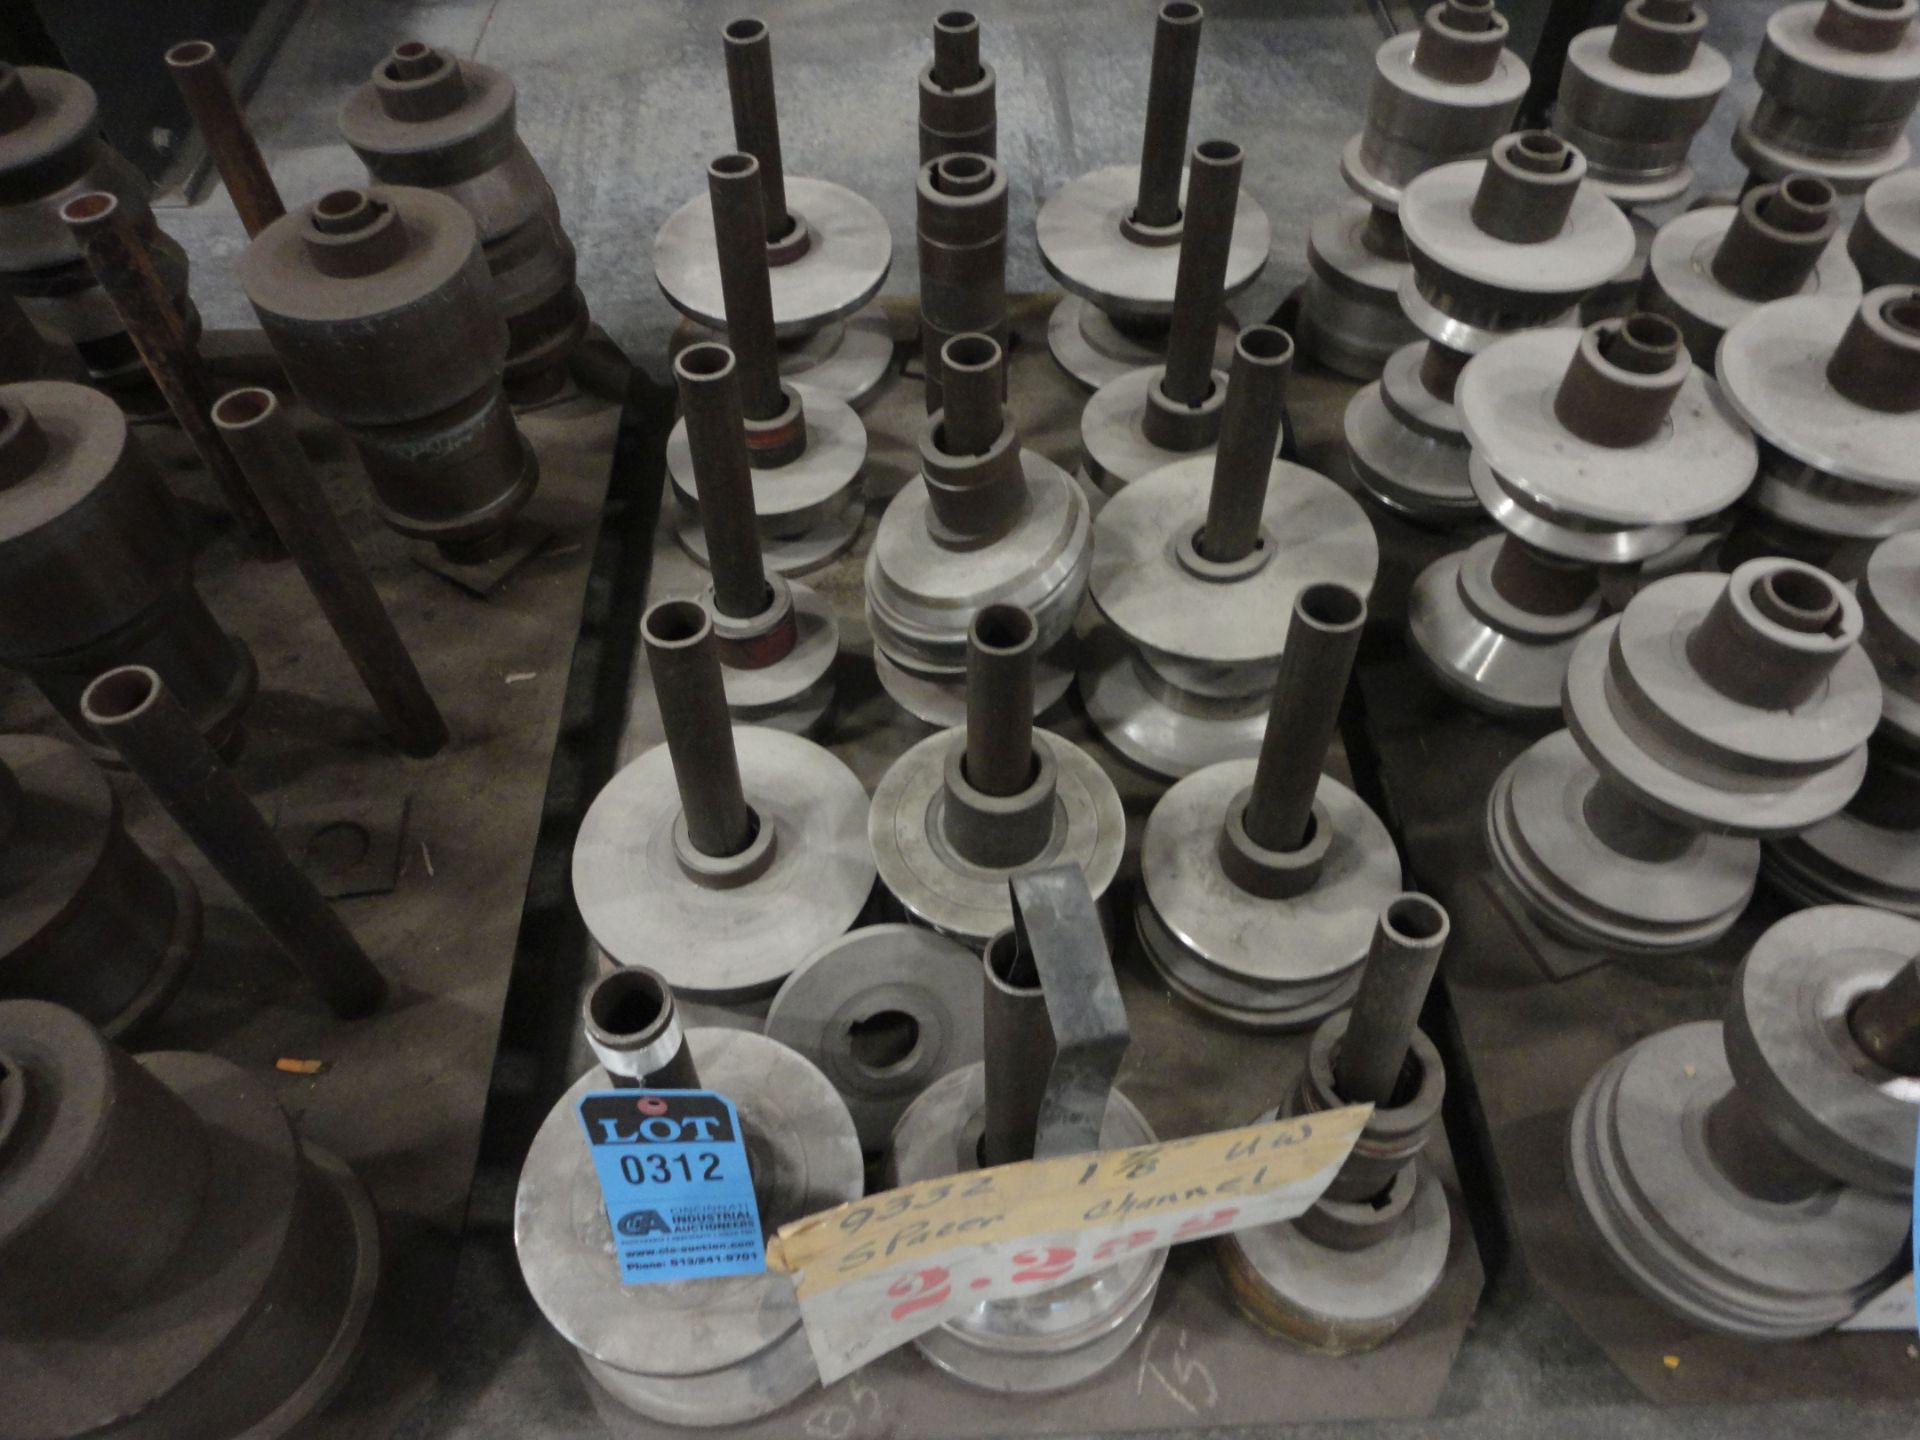 STAND 17/8" SPACER CHANNEL ROLL FORMER TOOLING WITH PRESS DIES